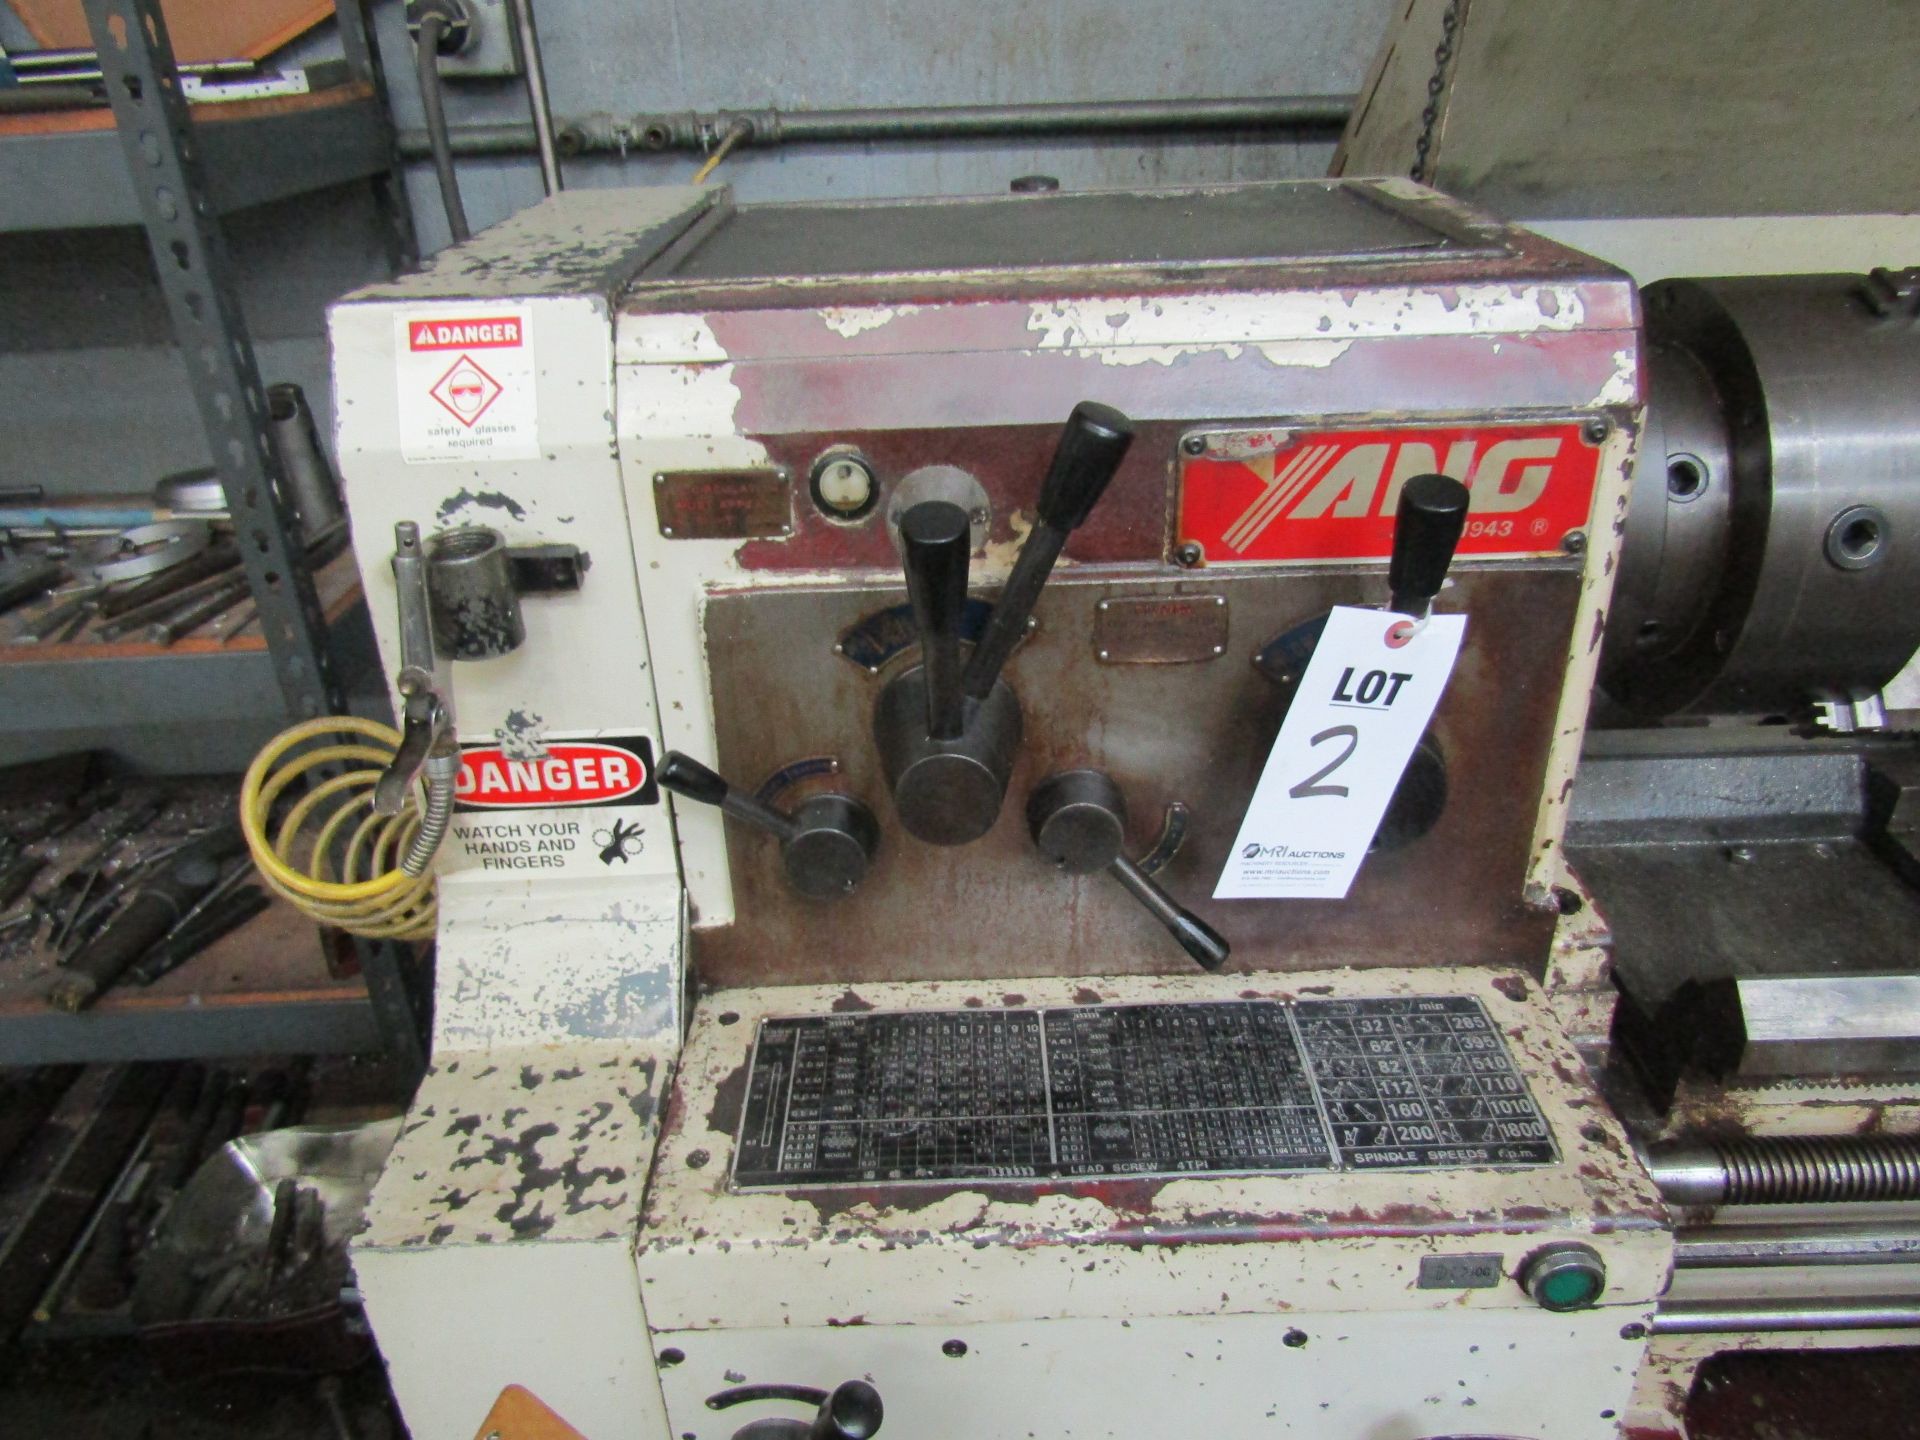 1995 YANG ENGINE LATHE, MODEL YANG-CL48150G, SERIAL B92668, WITH ASSOCIATED TOOL HOLDERS AND TOOLING - Image 2 of 8